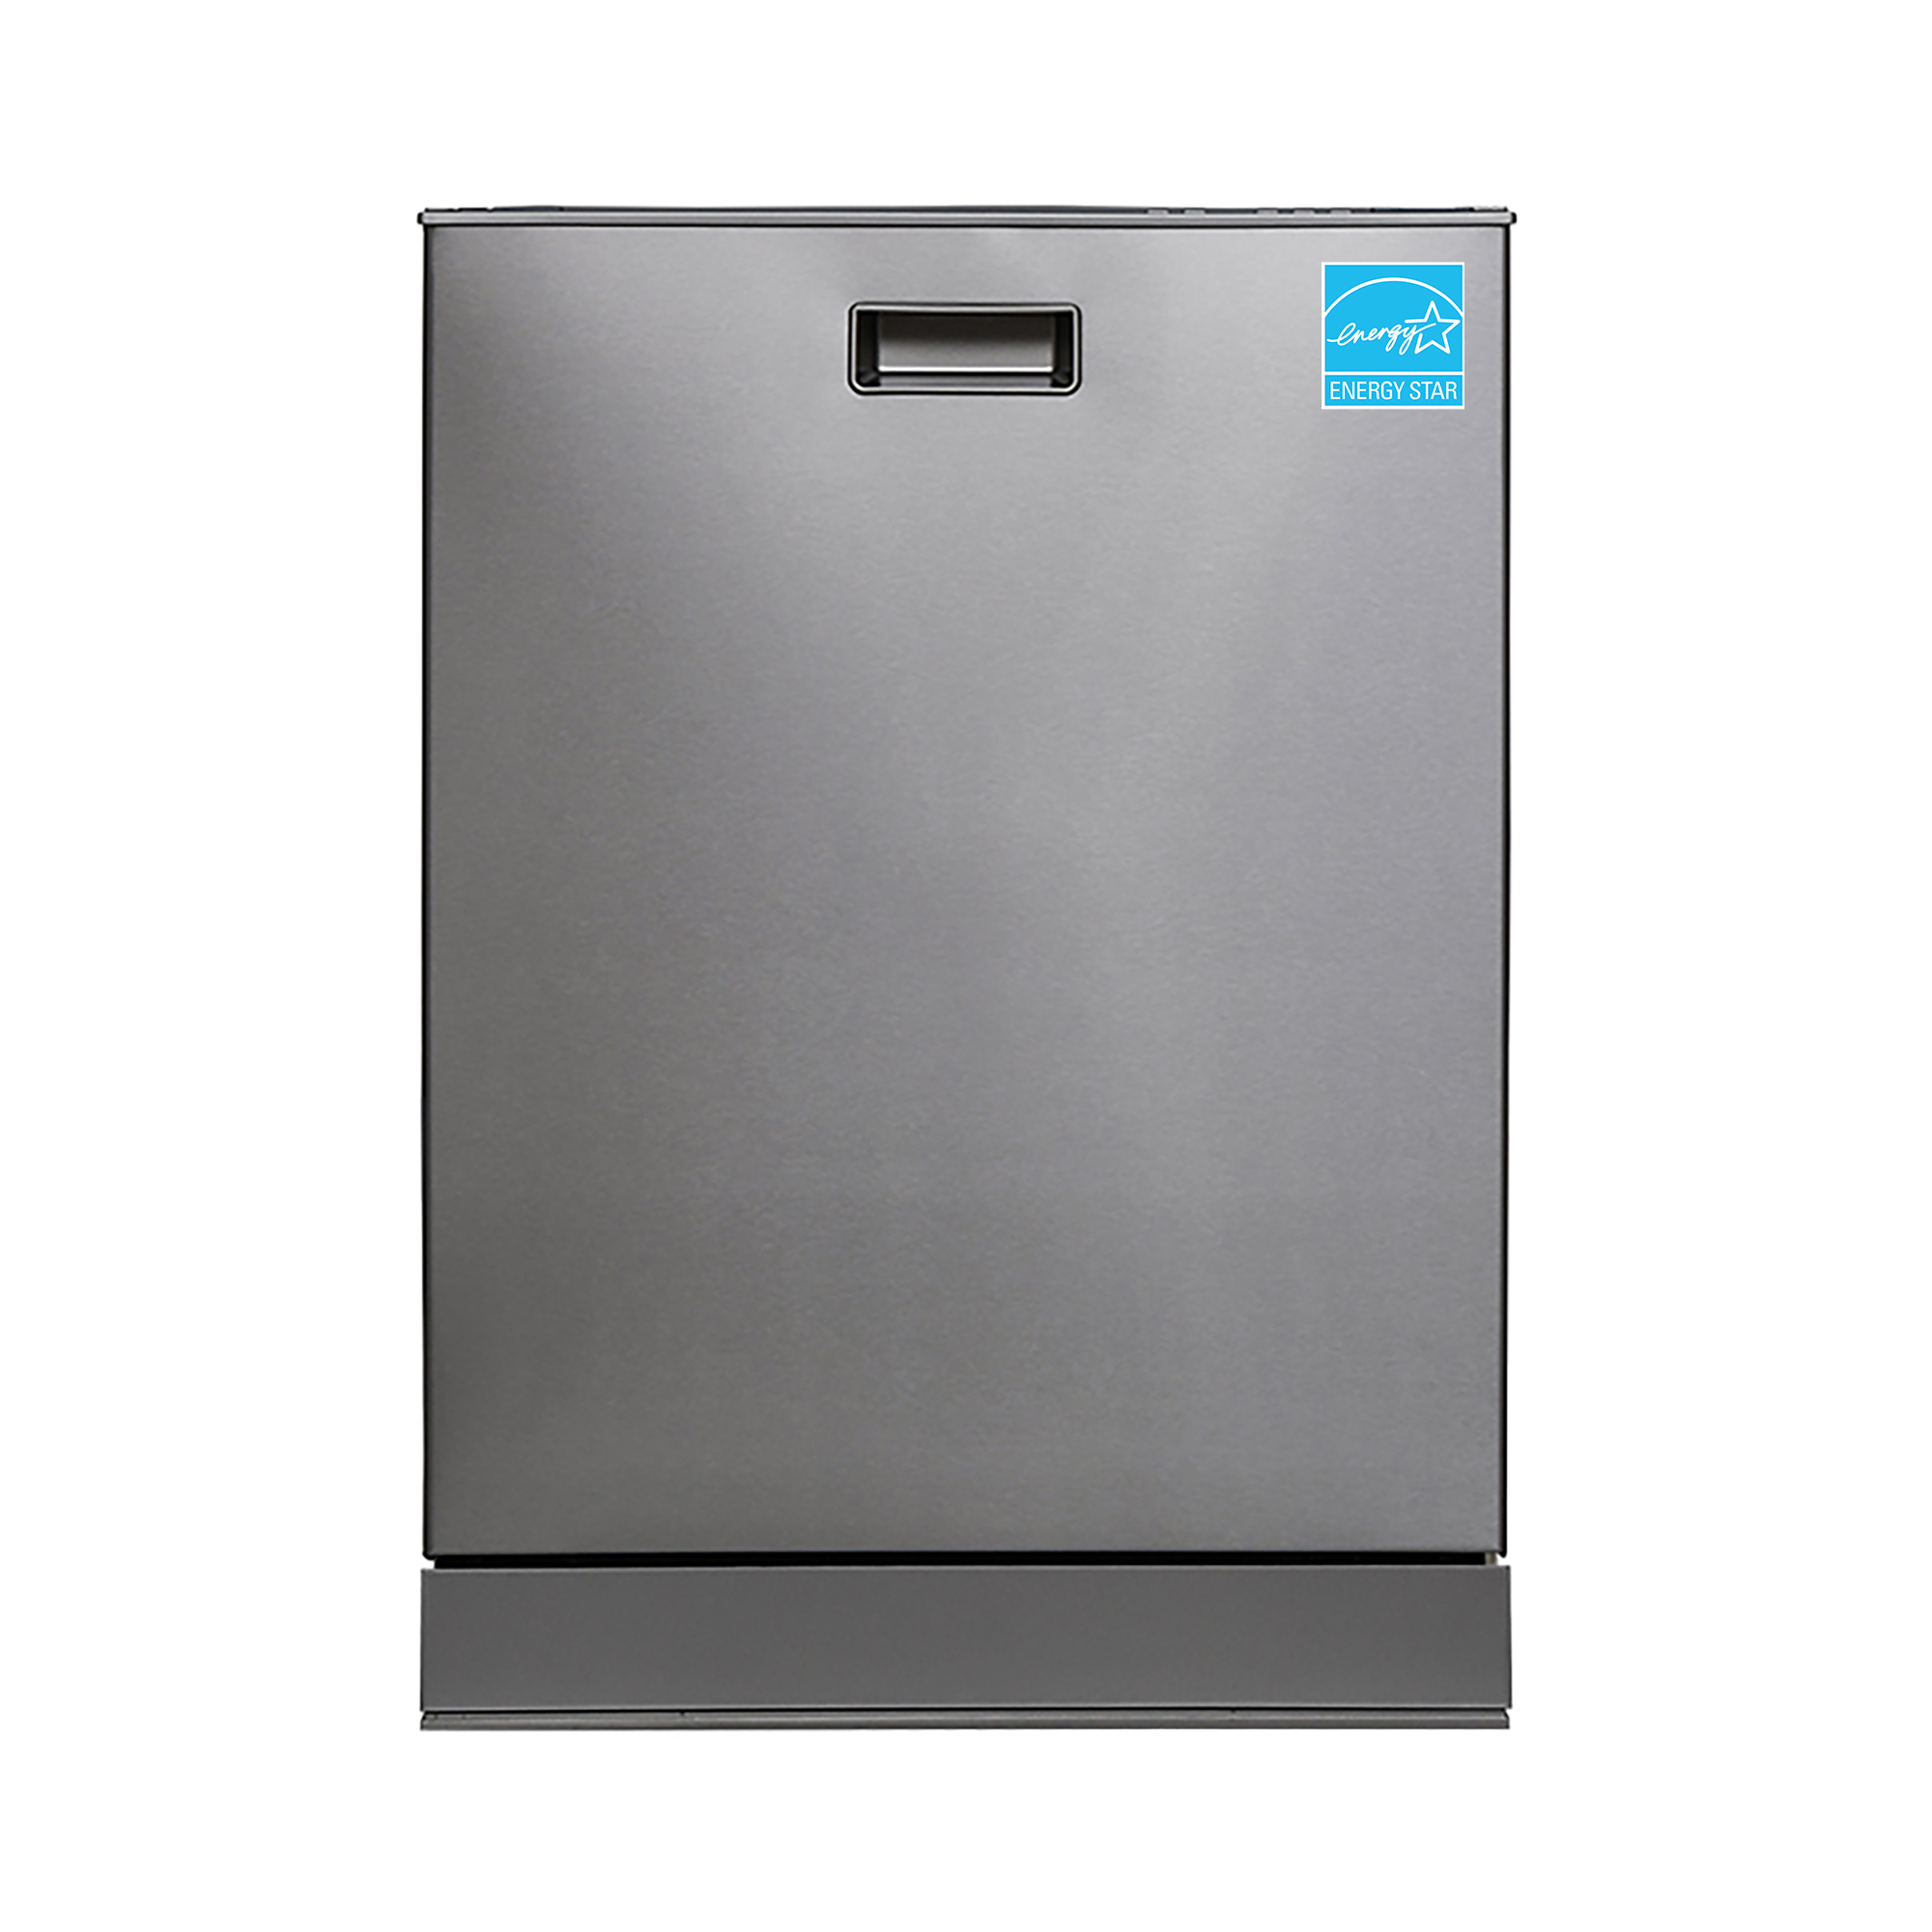 Equator 24 in Dishwasher Top control 15 pl Water 3.4g Quiet 51 dB 120V E-Star Silver